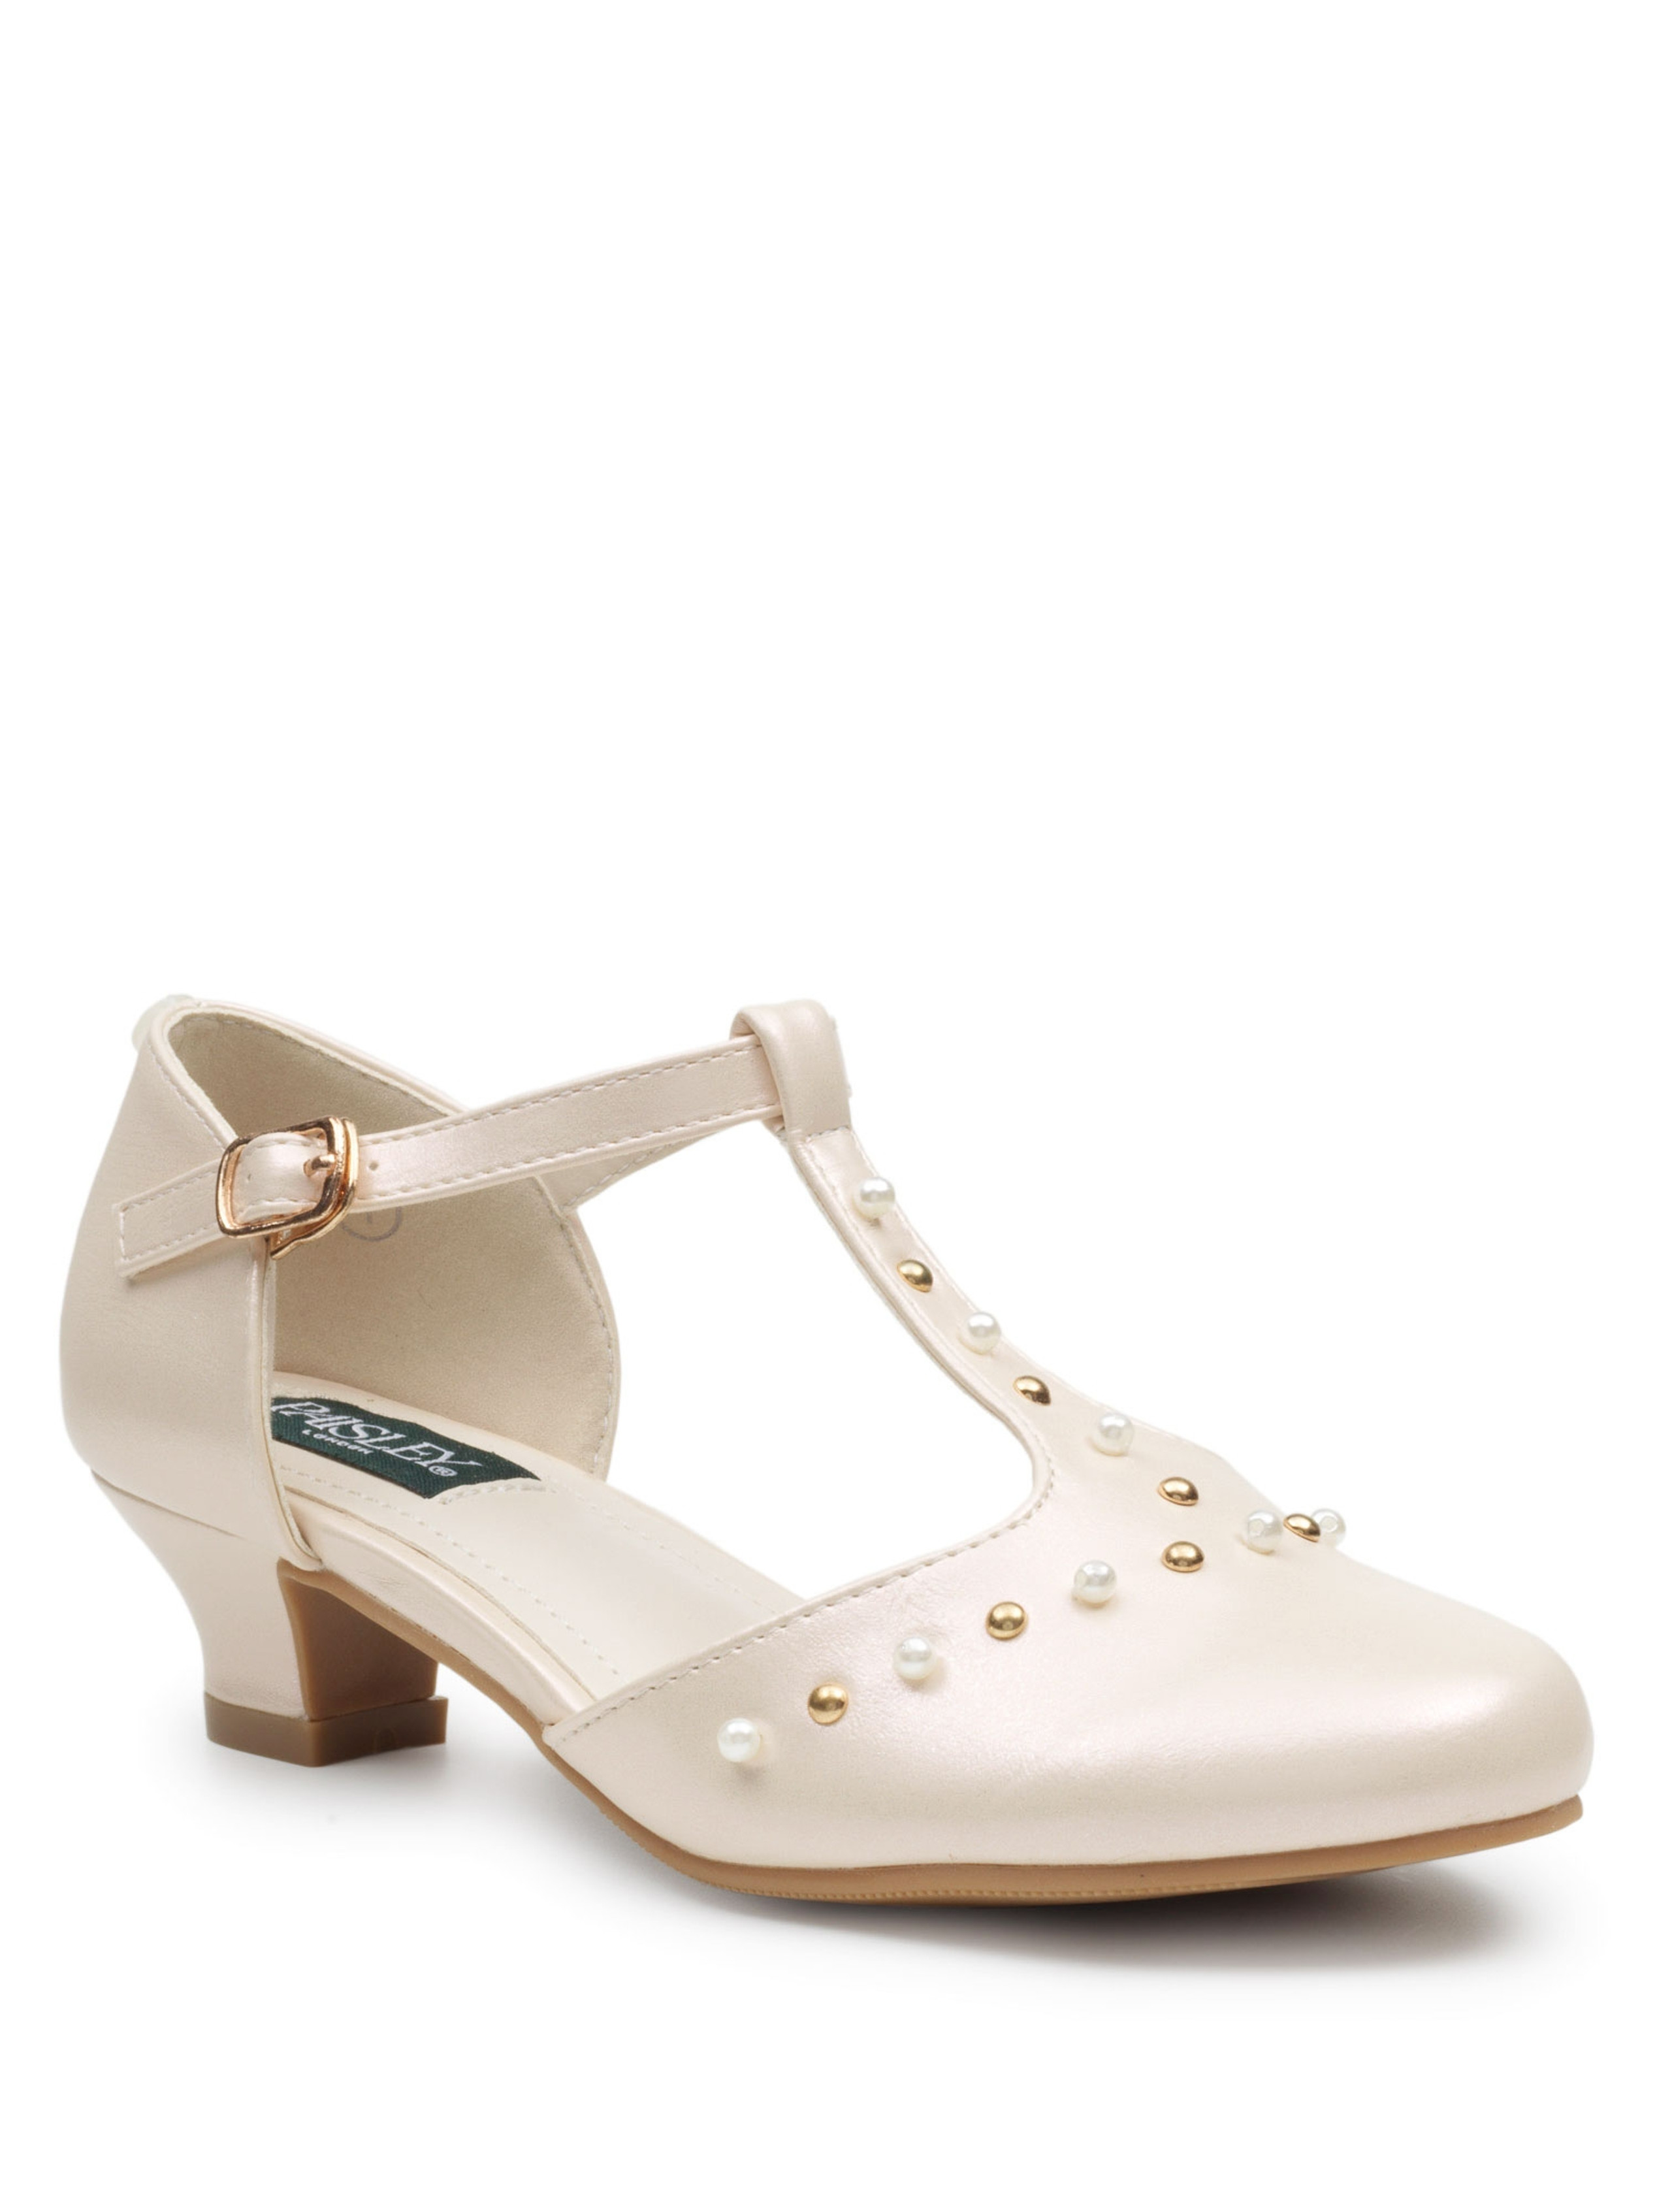 Girls gold shoes | Metallic gold flower girl shoes | Orchid